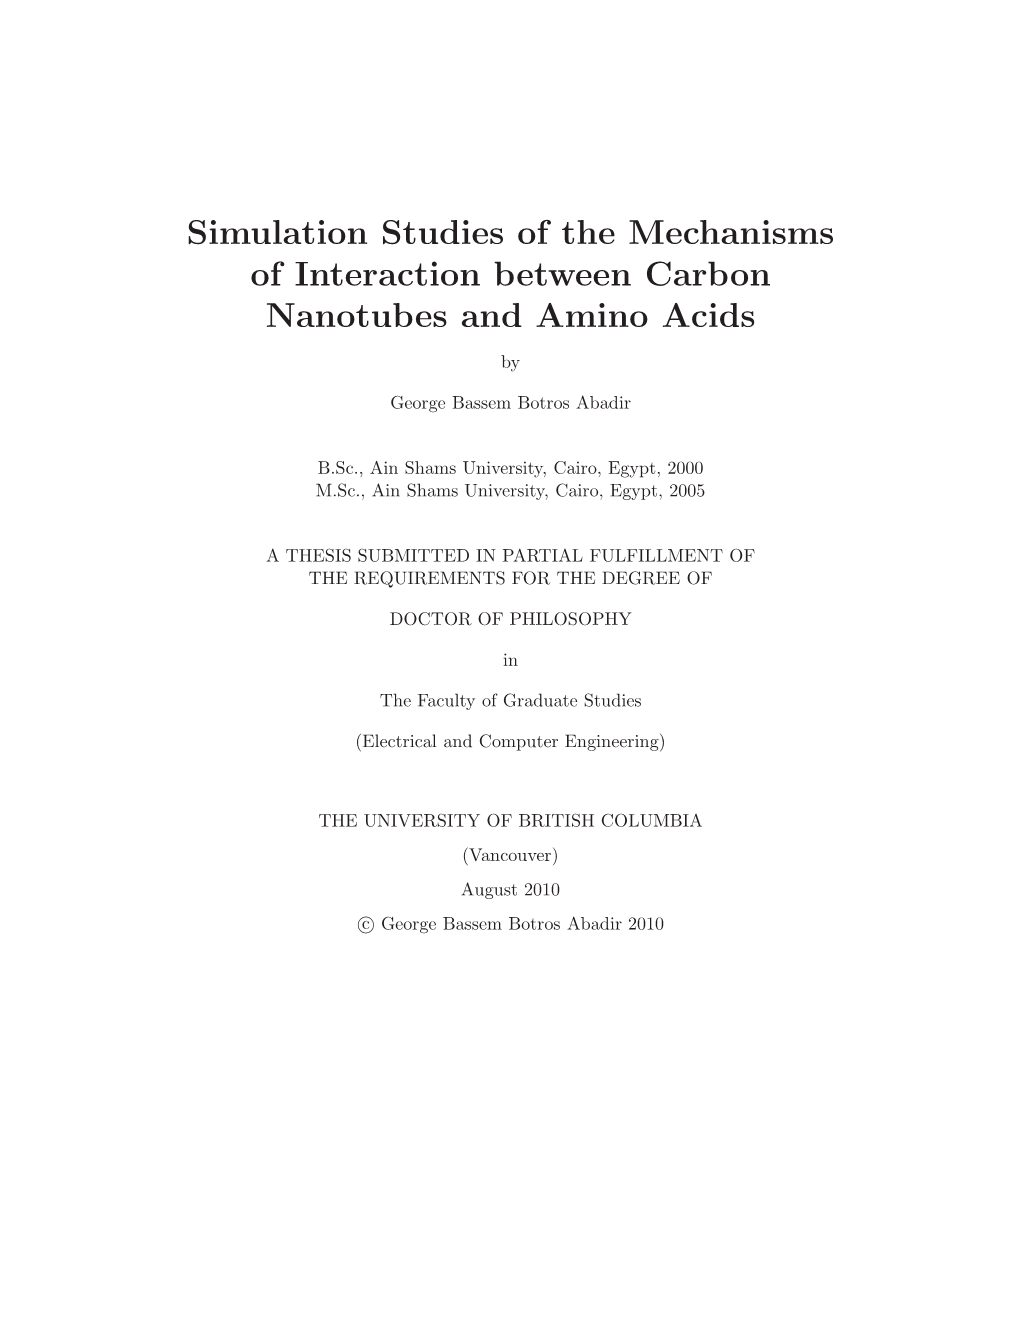 Simulation Studies of the Mechanisms of Interaction Between Carbon Nanotubes and Amino Acids